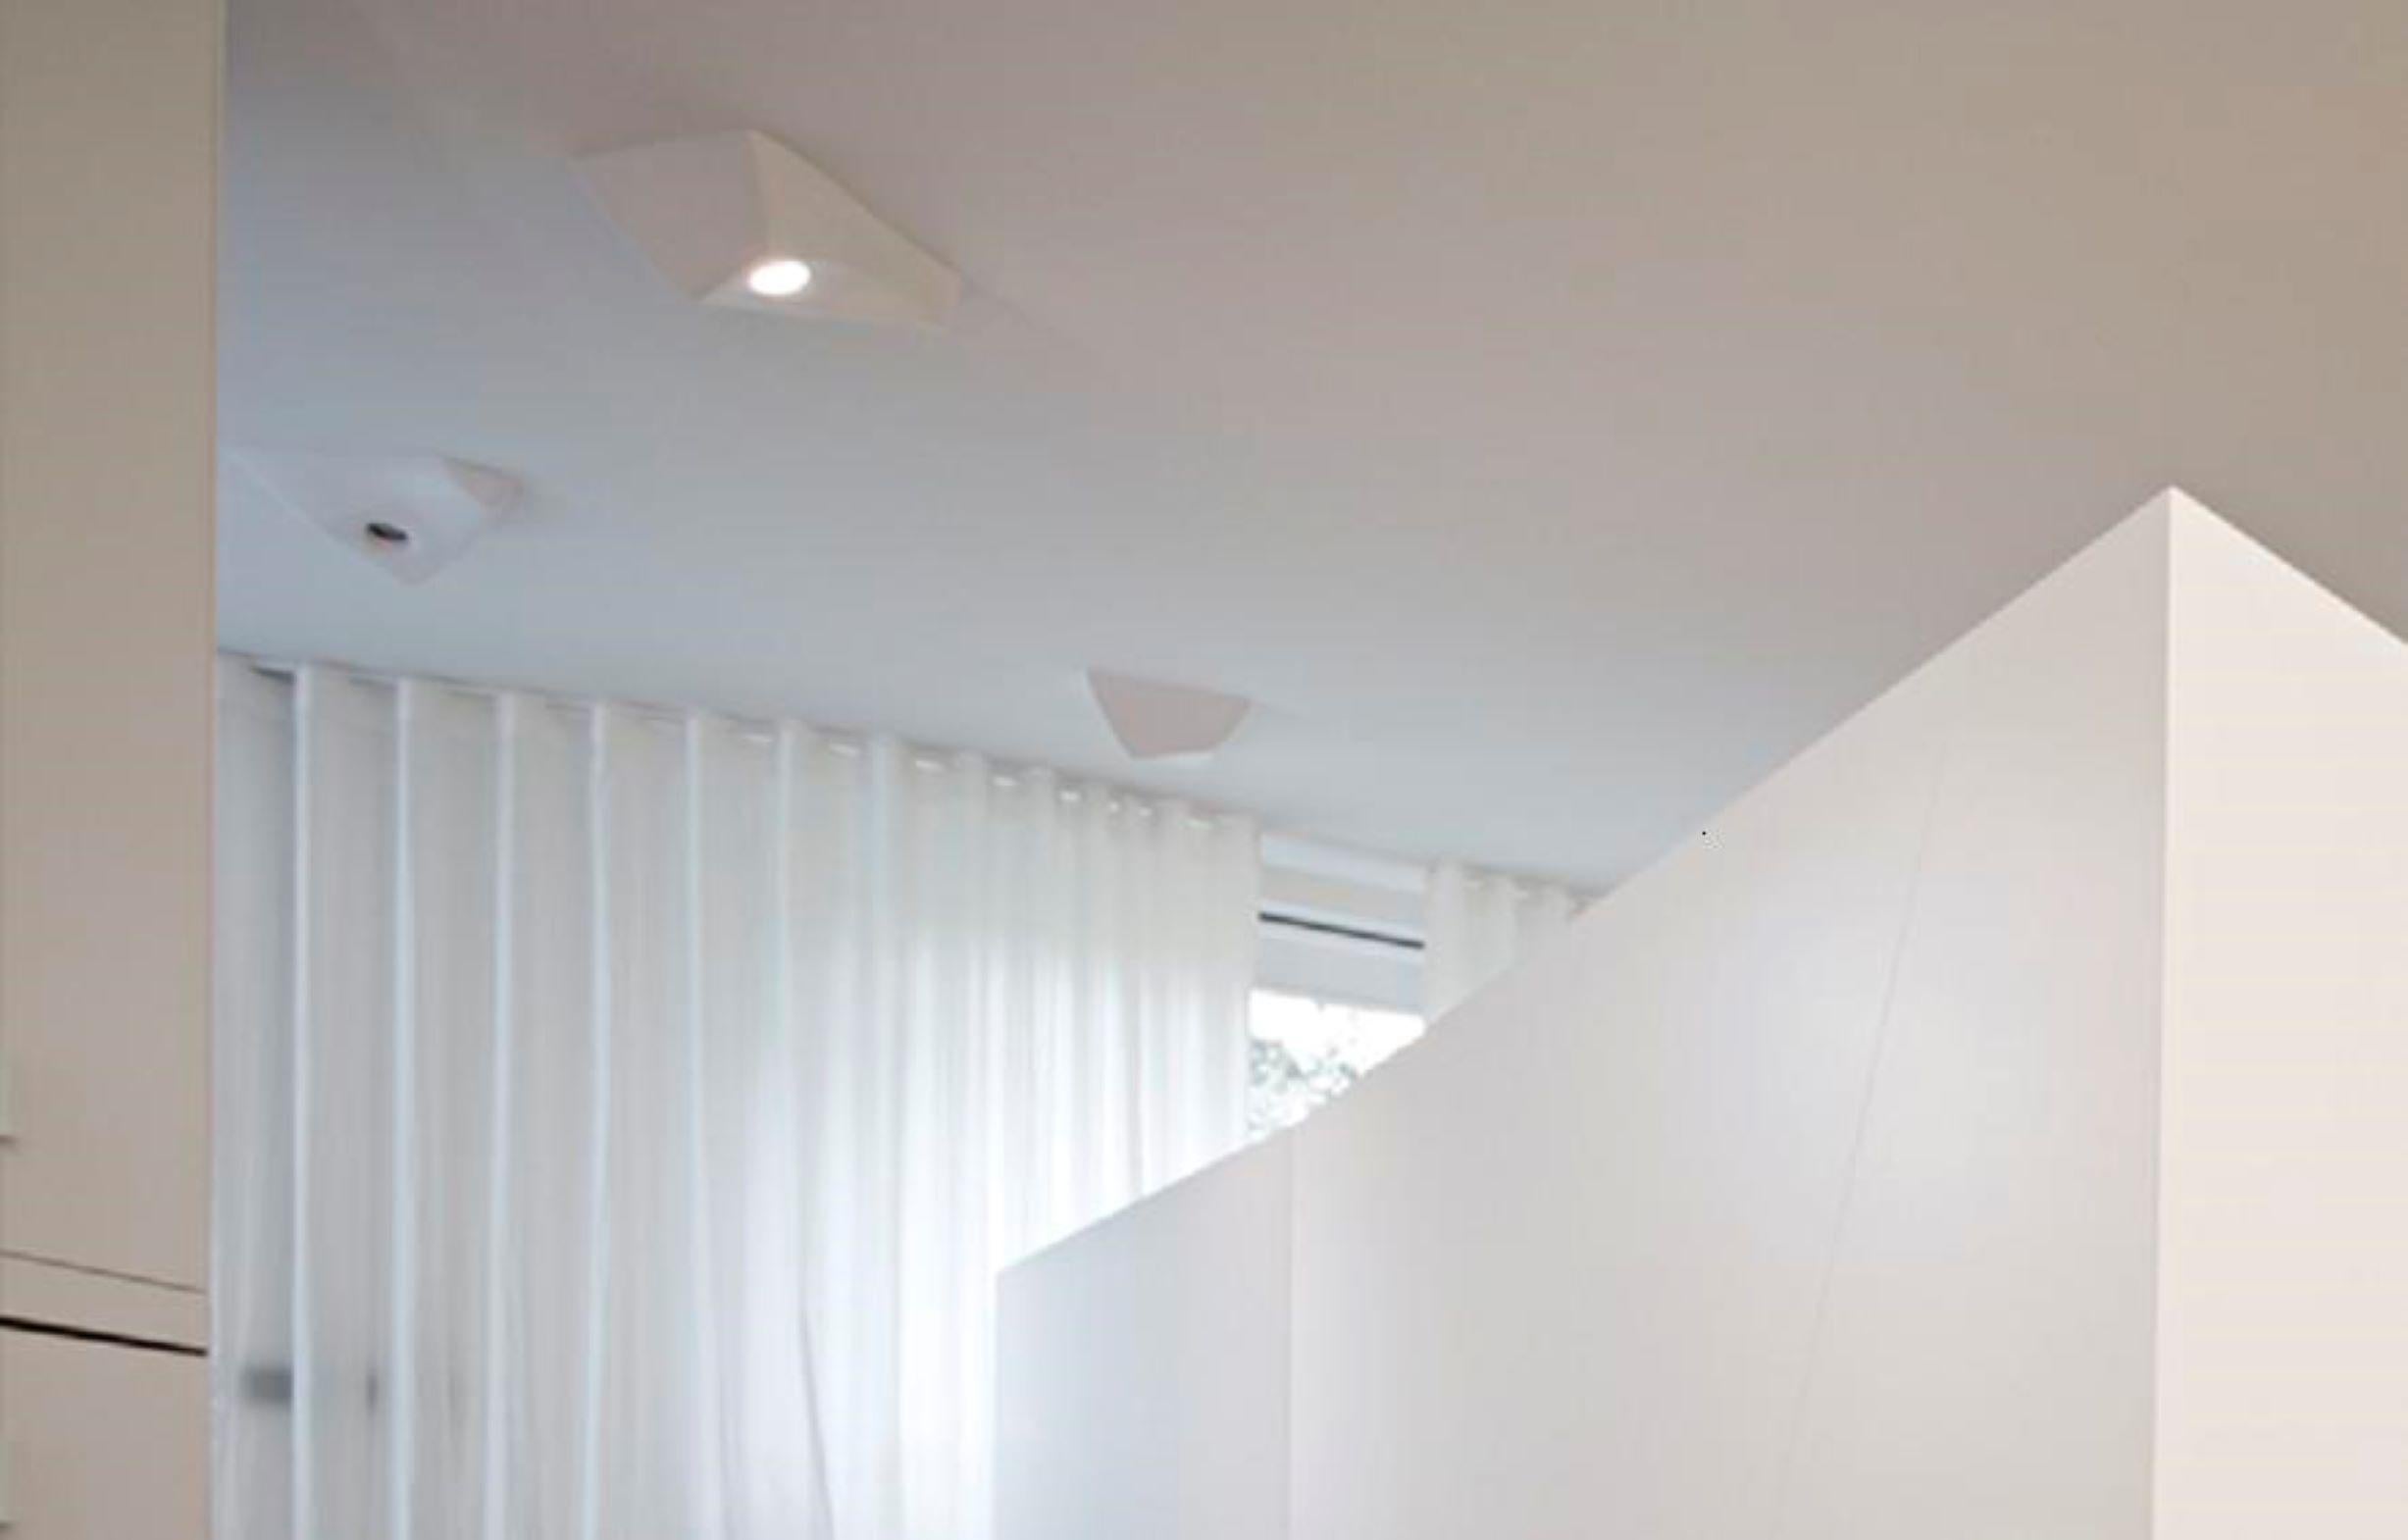 Ceiling fixture of polycarbonate painted mat white
with leds, integrated driver.